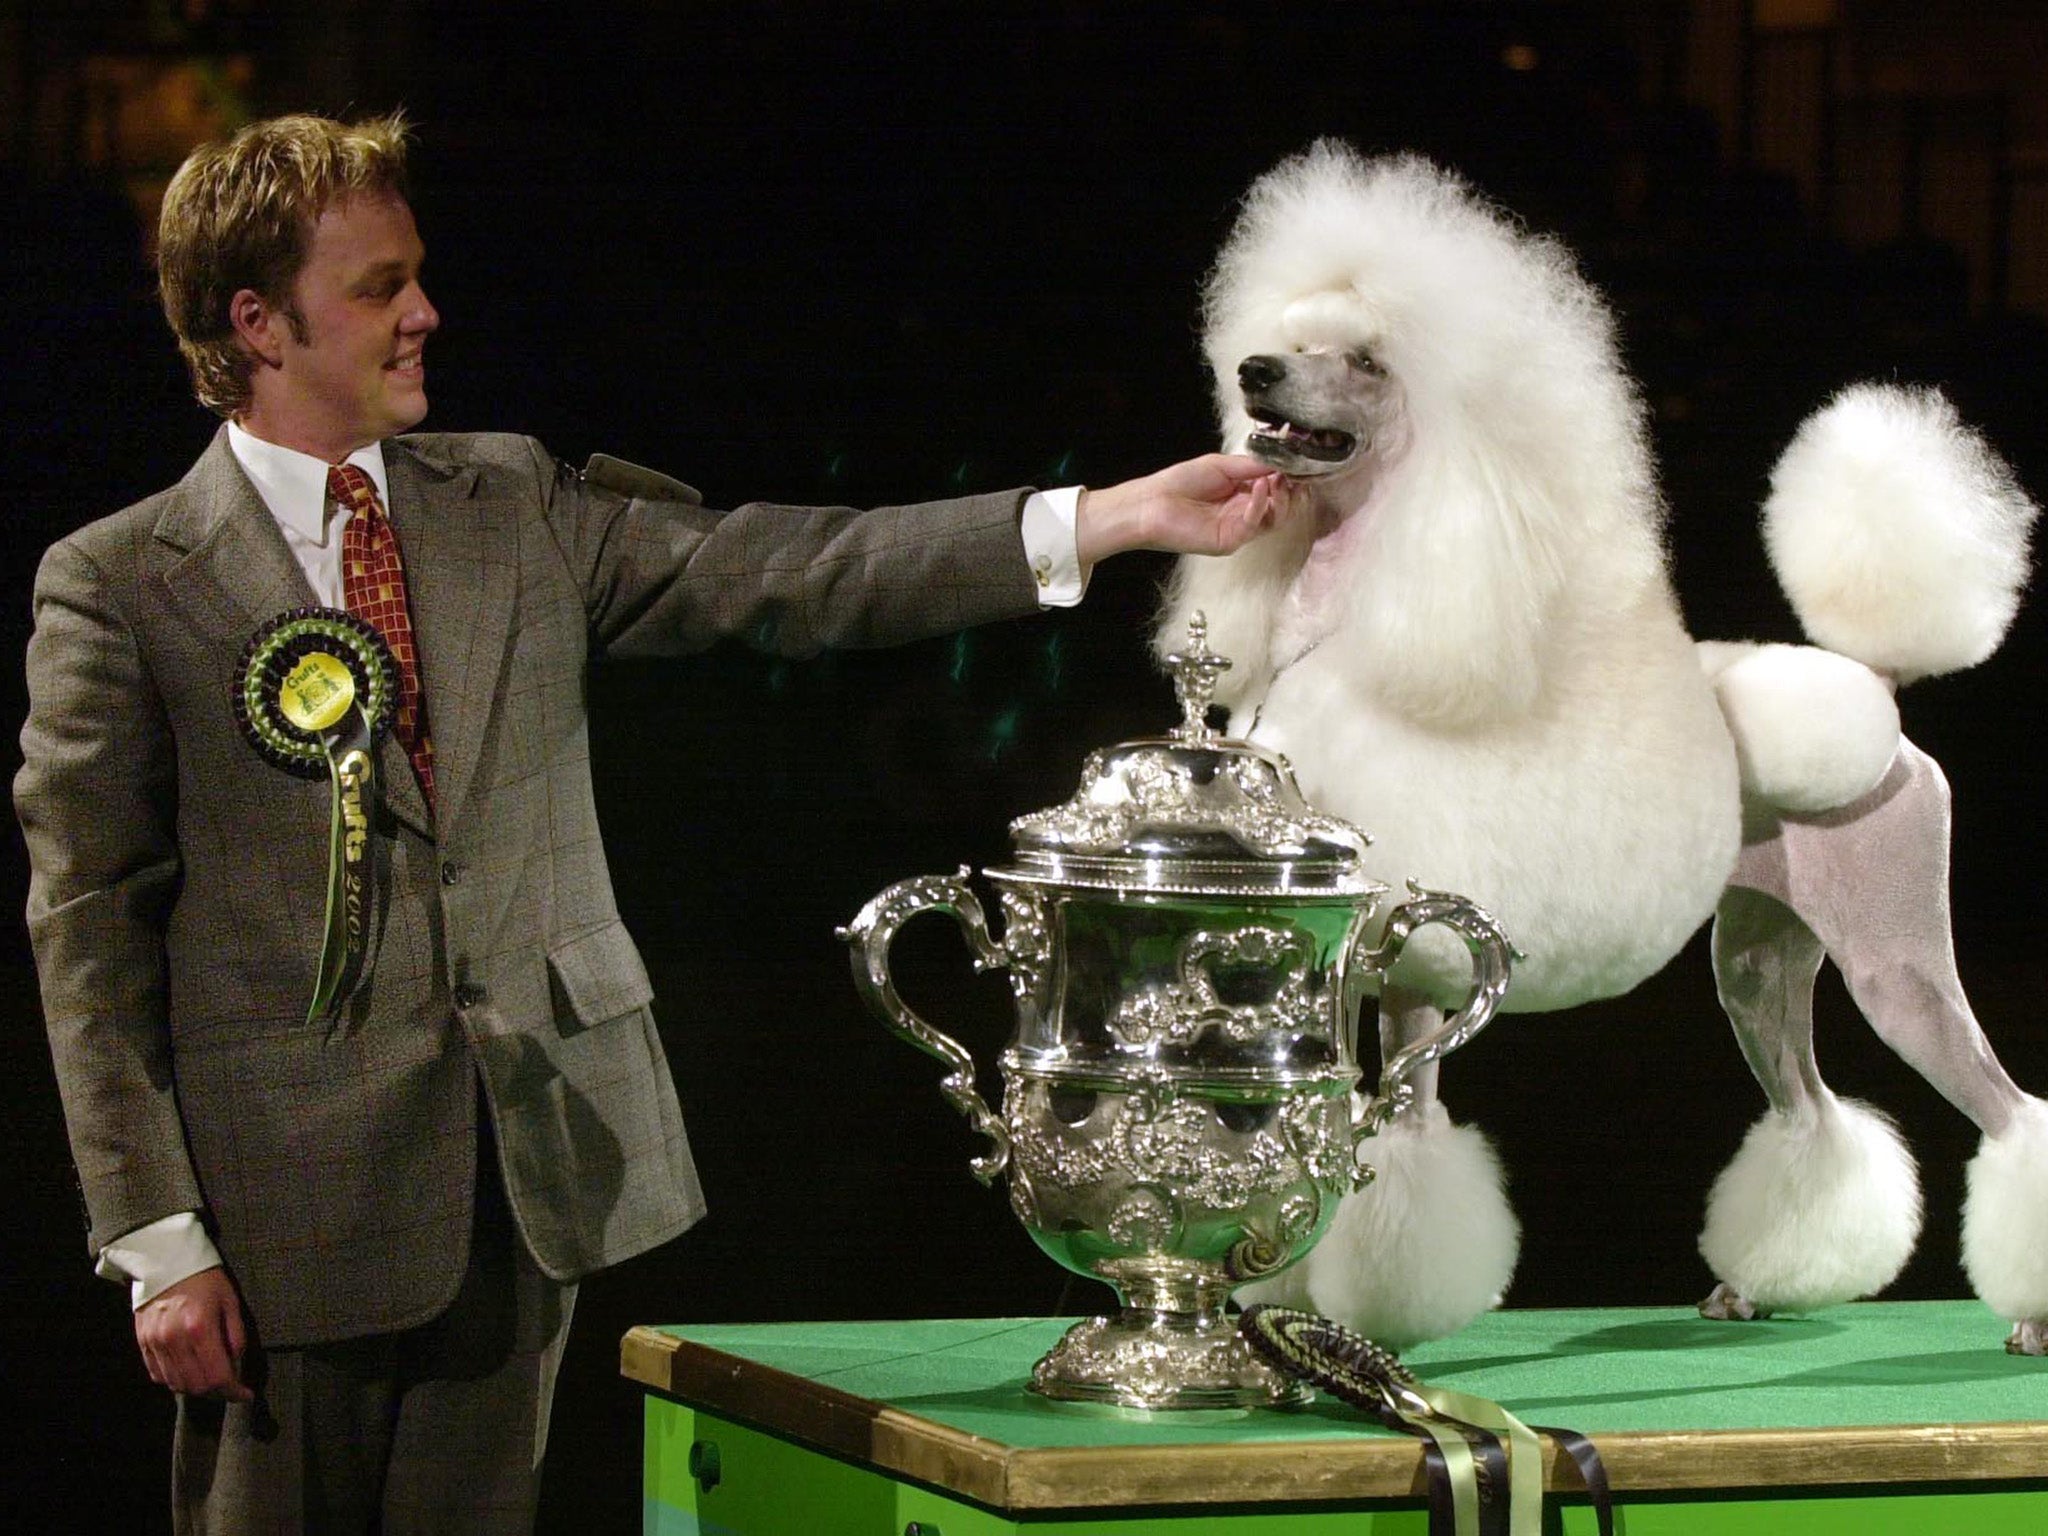 Standard poodle Topscore Contradiction from Norway with handler Michael Nilson after being named as Best in Show winner at Crufts in 2002, the first foreign winner